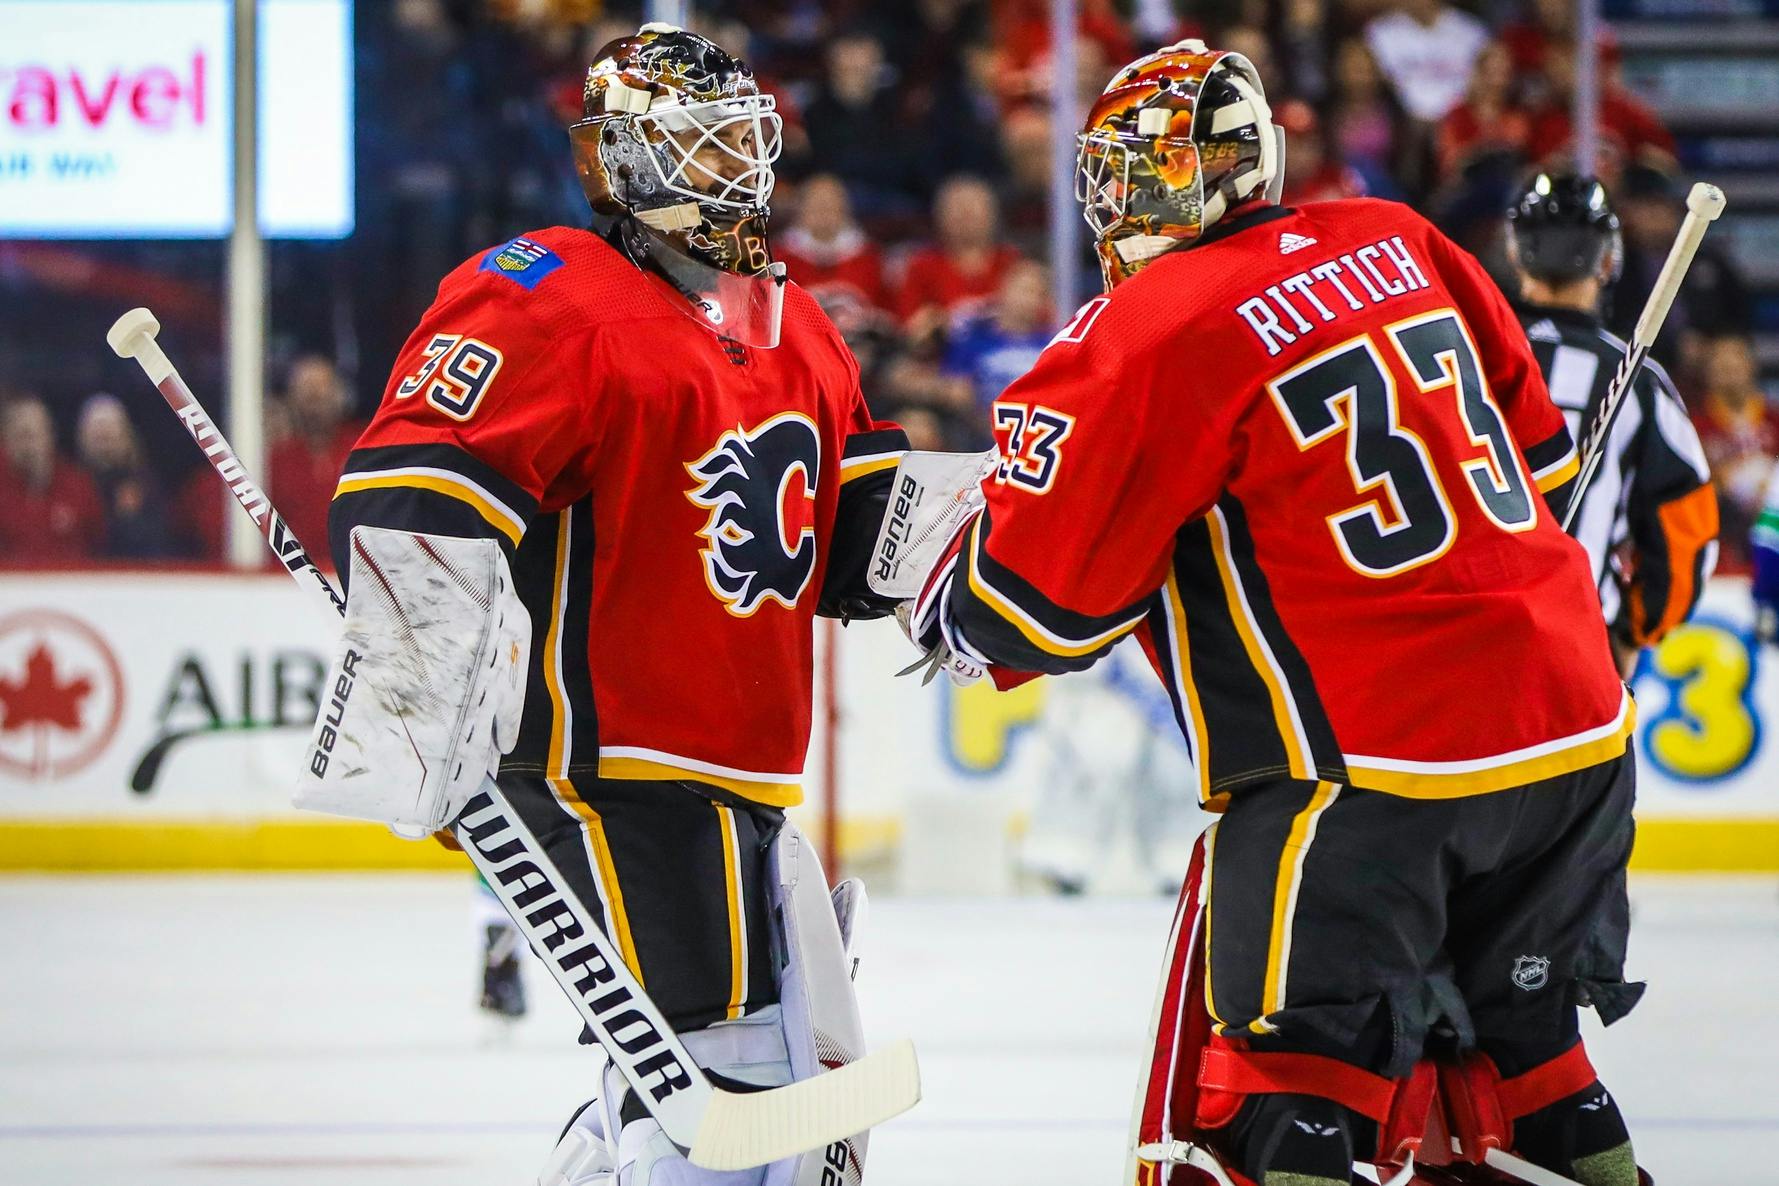 Talbot and Rittich